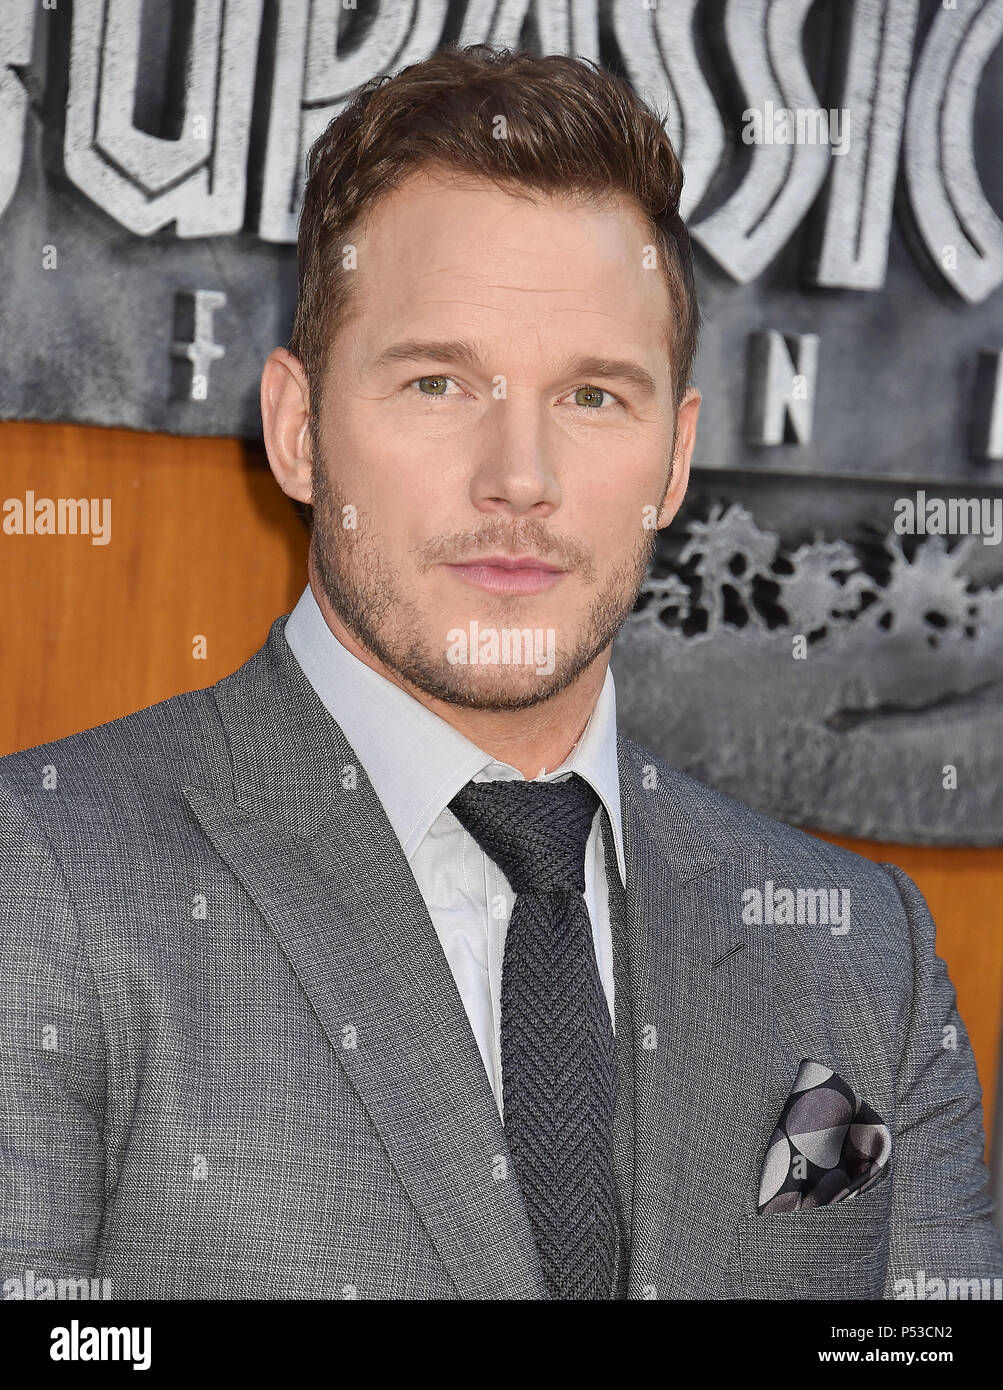 CHRIS PRATT US film actor  attends the premiere of Universal Pictures and Amblin Entertainment's 'Jurassic World: Fallen Kingdom' at Walt Disney Concert Hall on June 12, 2018 in Los Angeles, California. Photo: Jeffrey Mayer Stock Photo